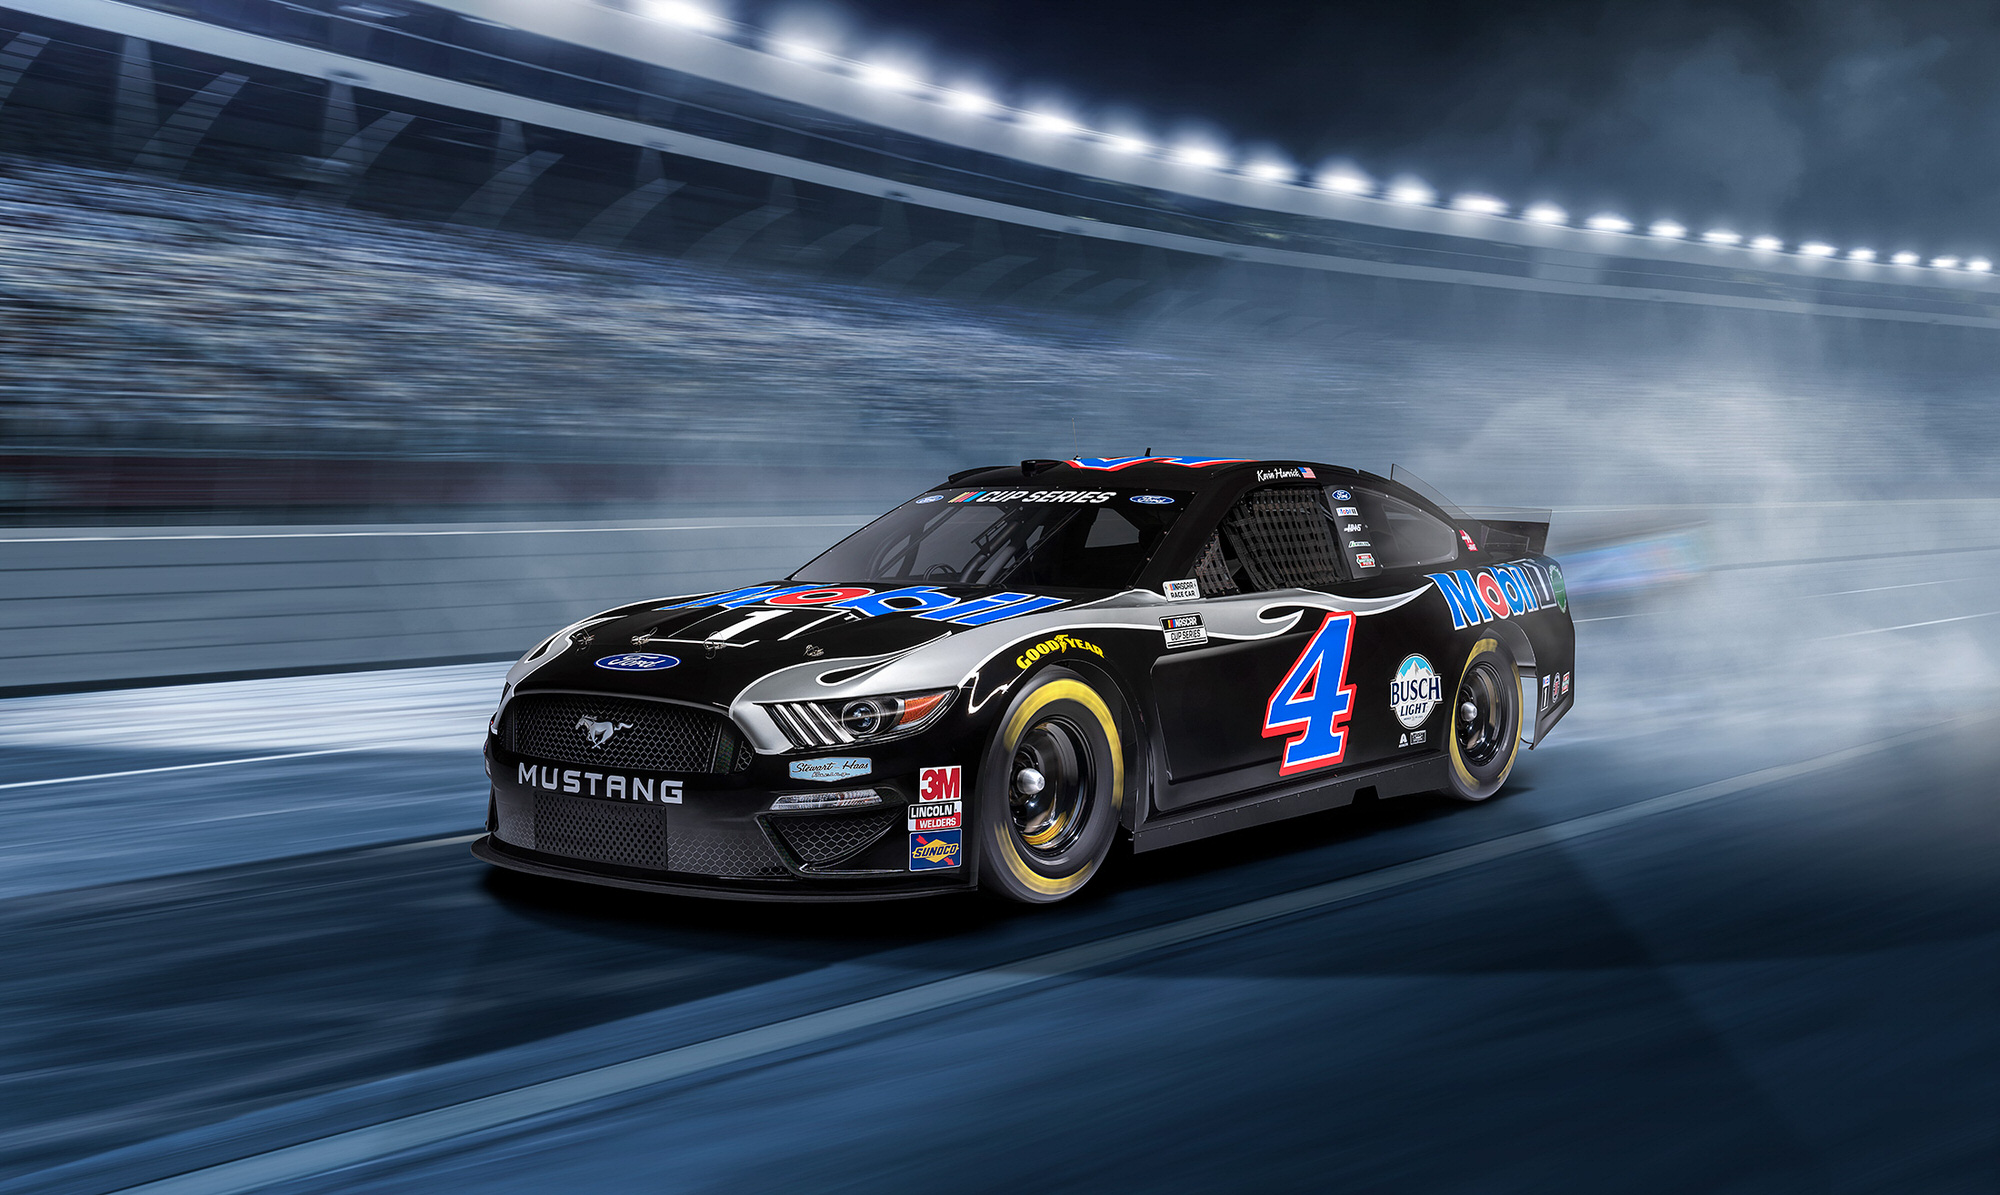 Kevin Harvick Mobil 1 NASCAR commercial photography